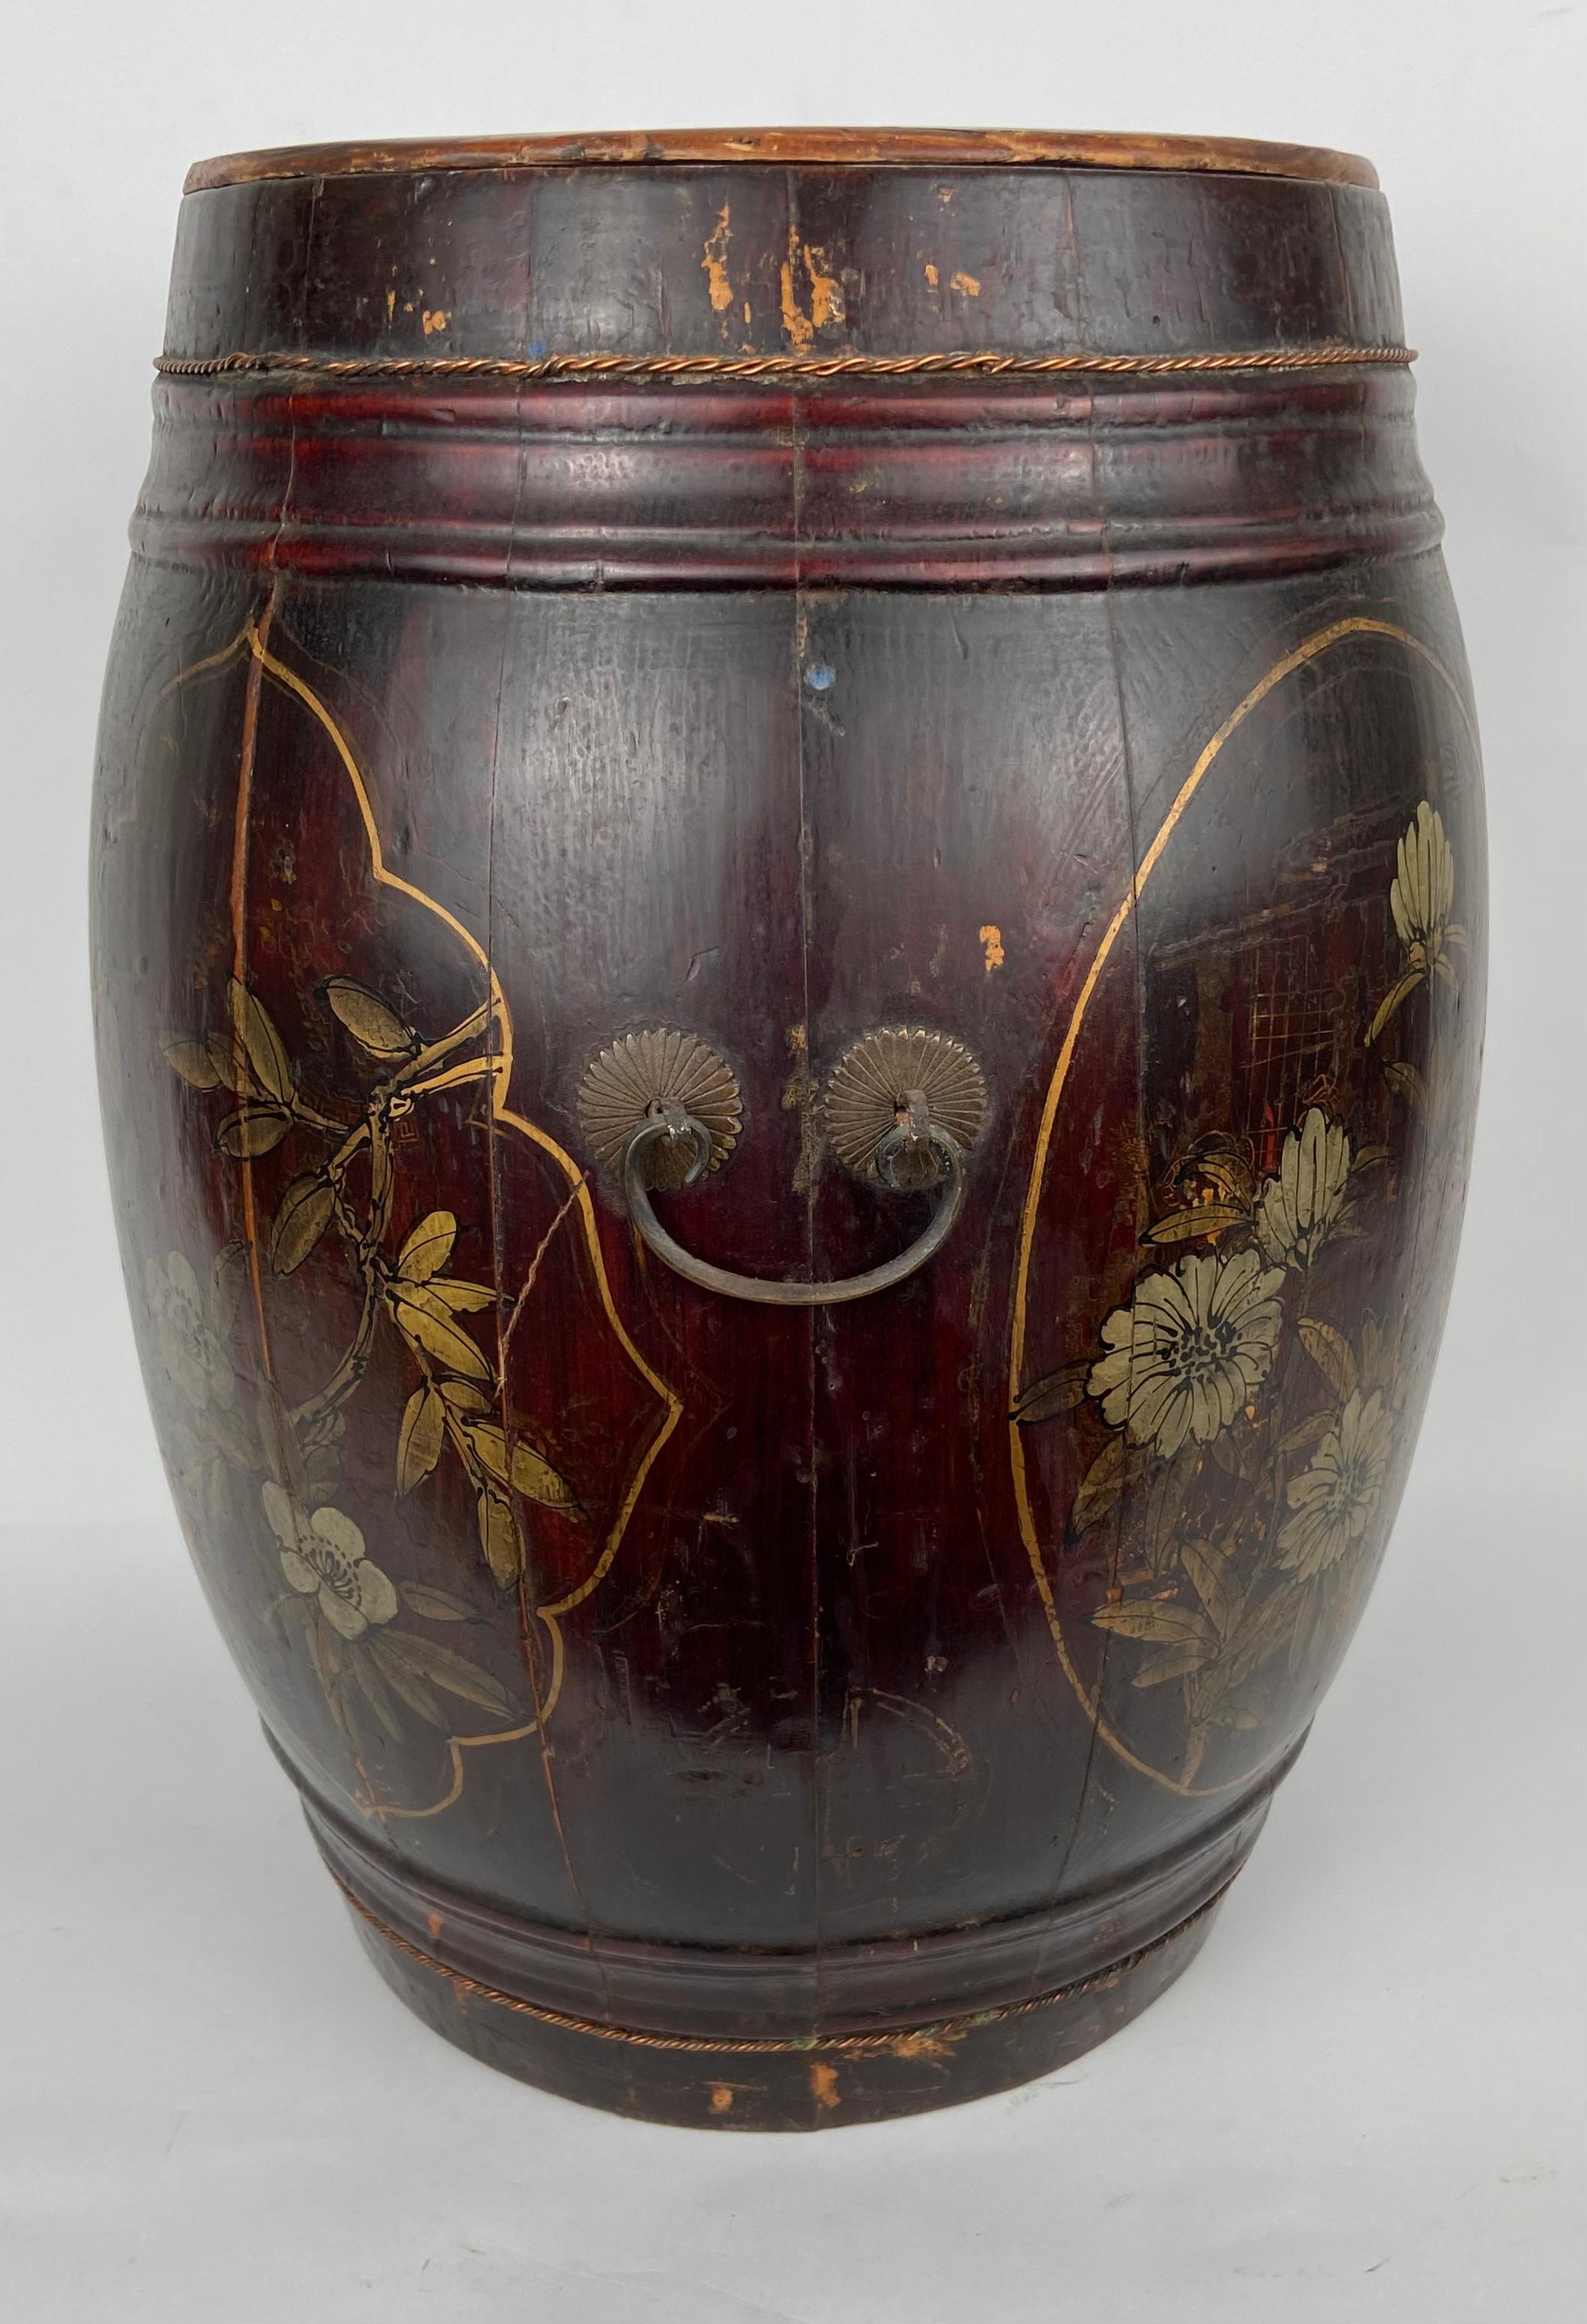 Rice barrel with lid. Decorated with cartouches with flowers and butterflies.
China, early 19th century. 